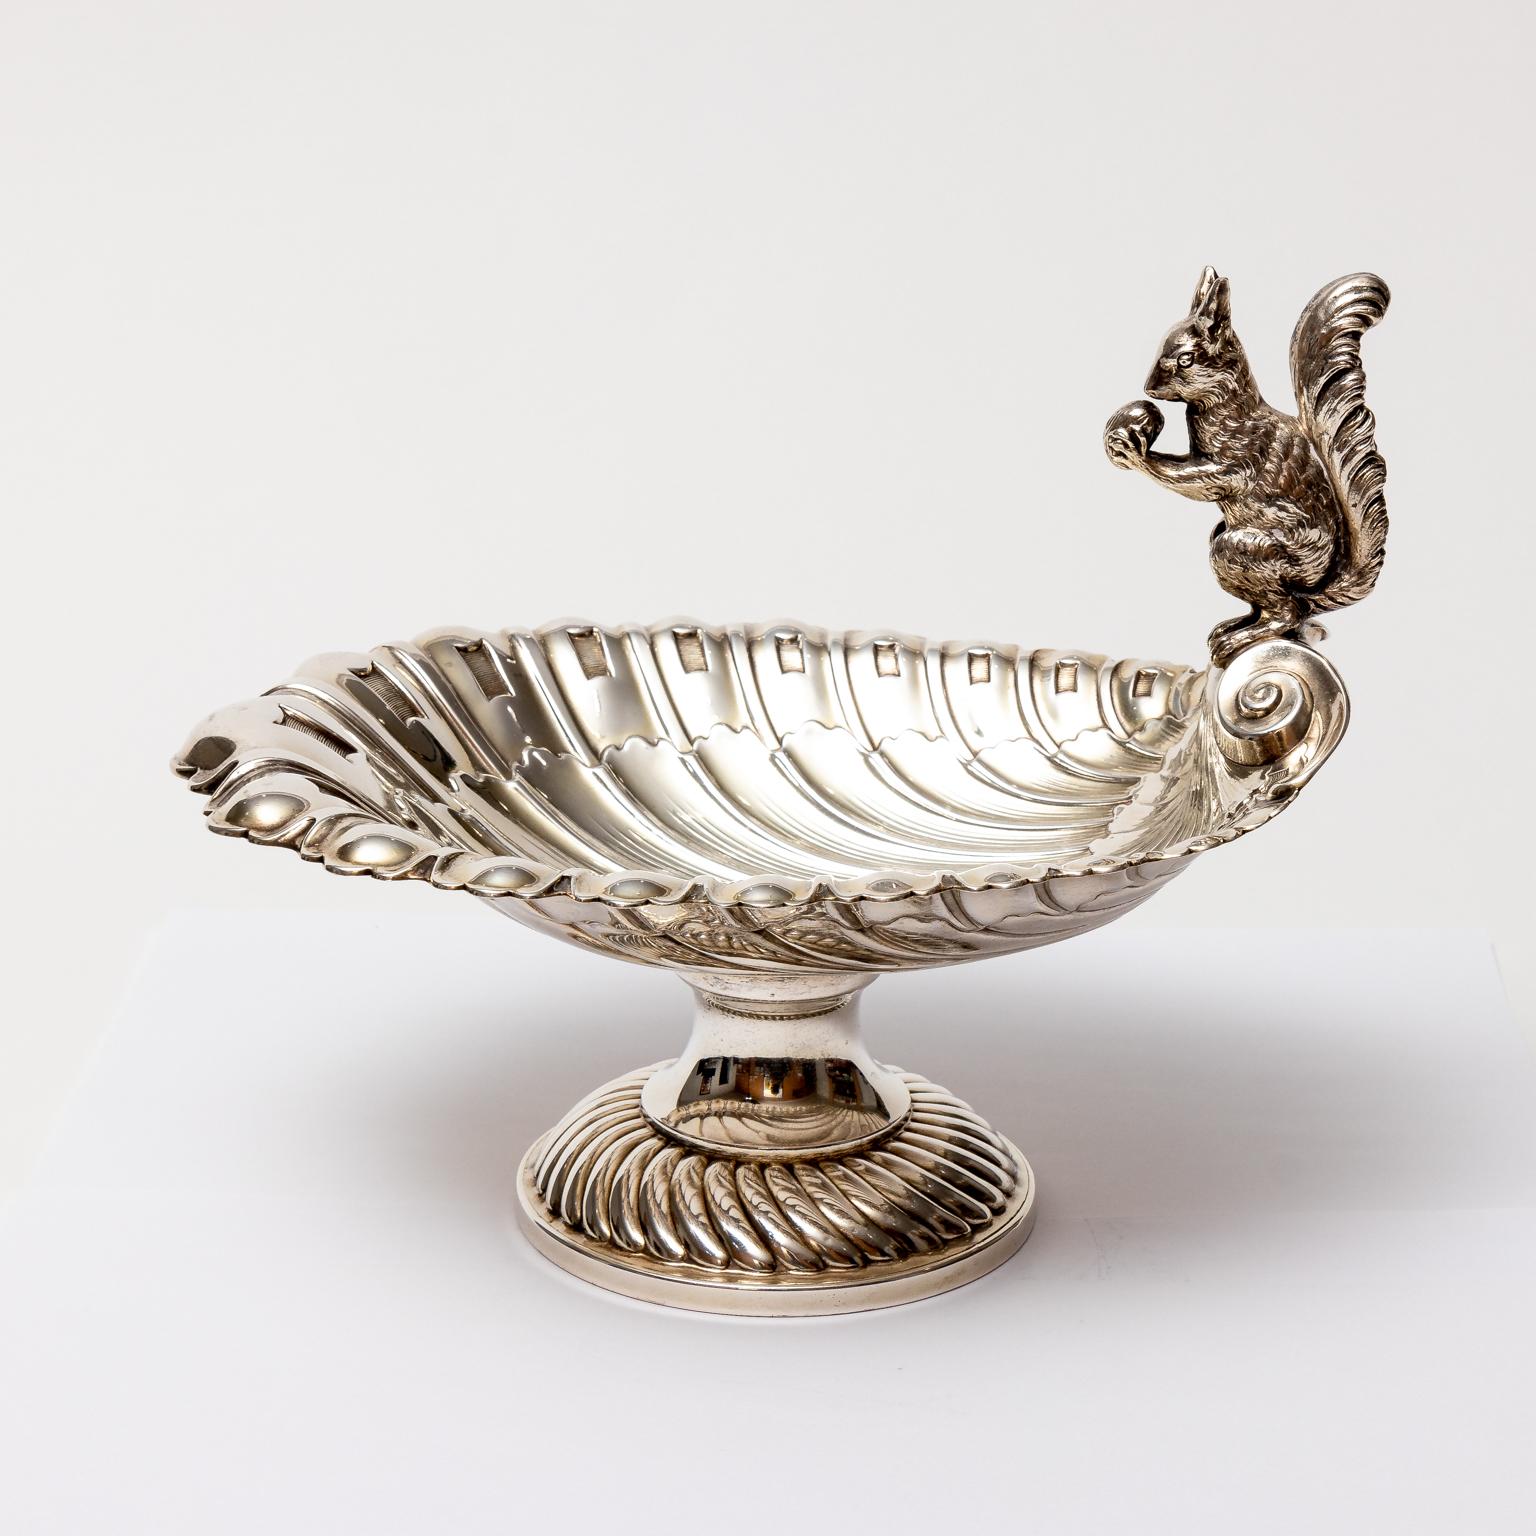 Circa 1900s English silver plate squirrel dish in the Edwardian style on pedestal base with scallop shell. Made in England. Please note of wear consistent with age.